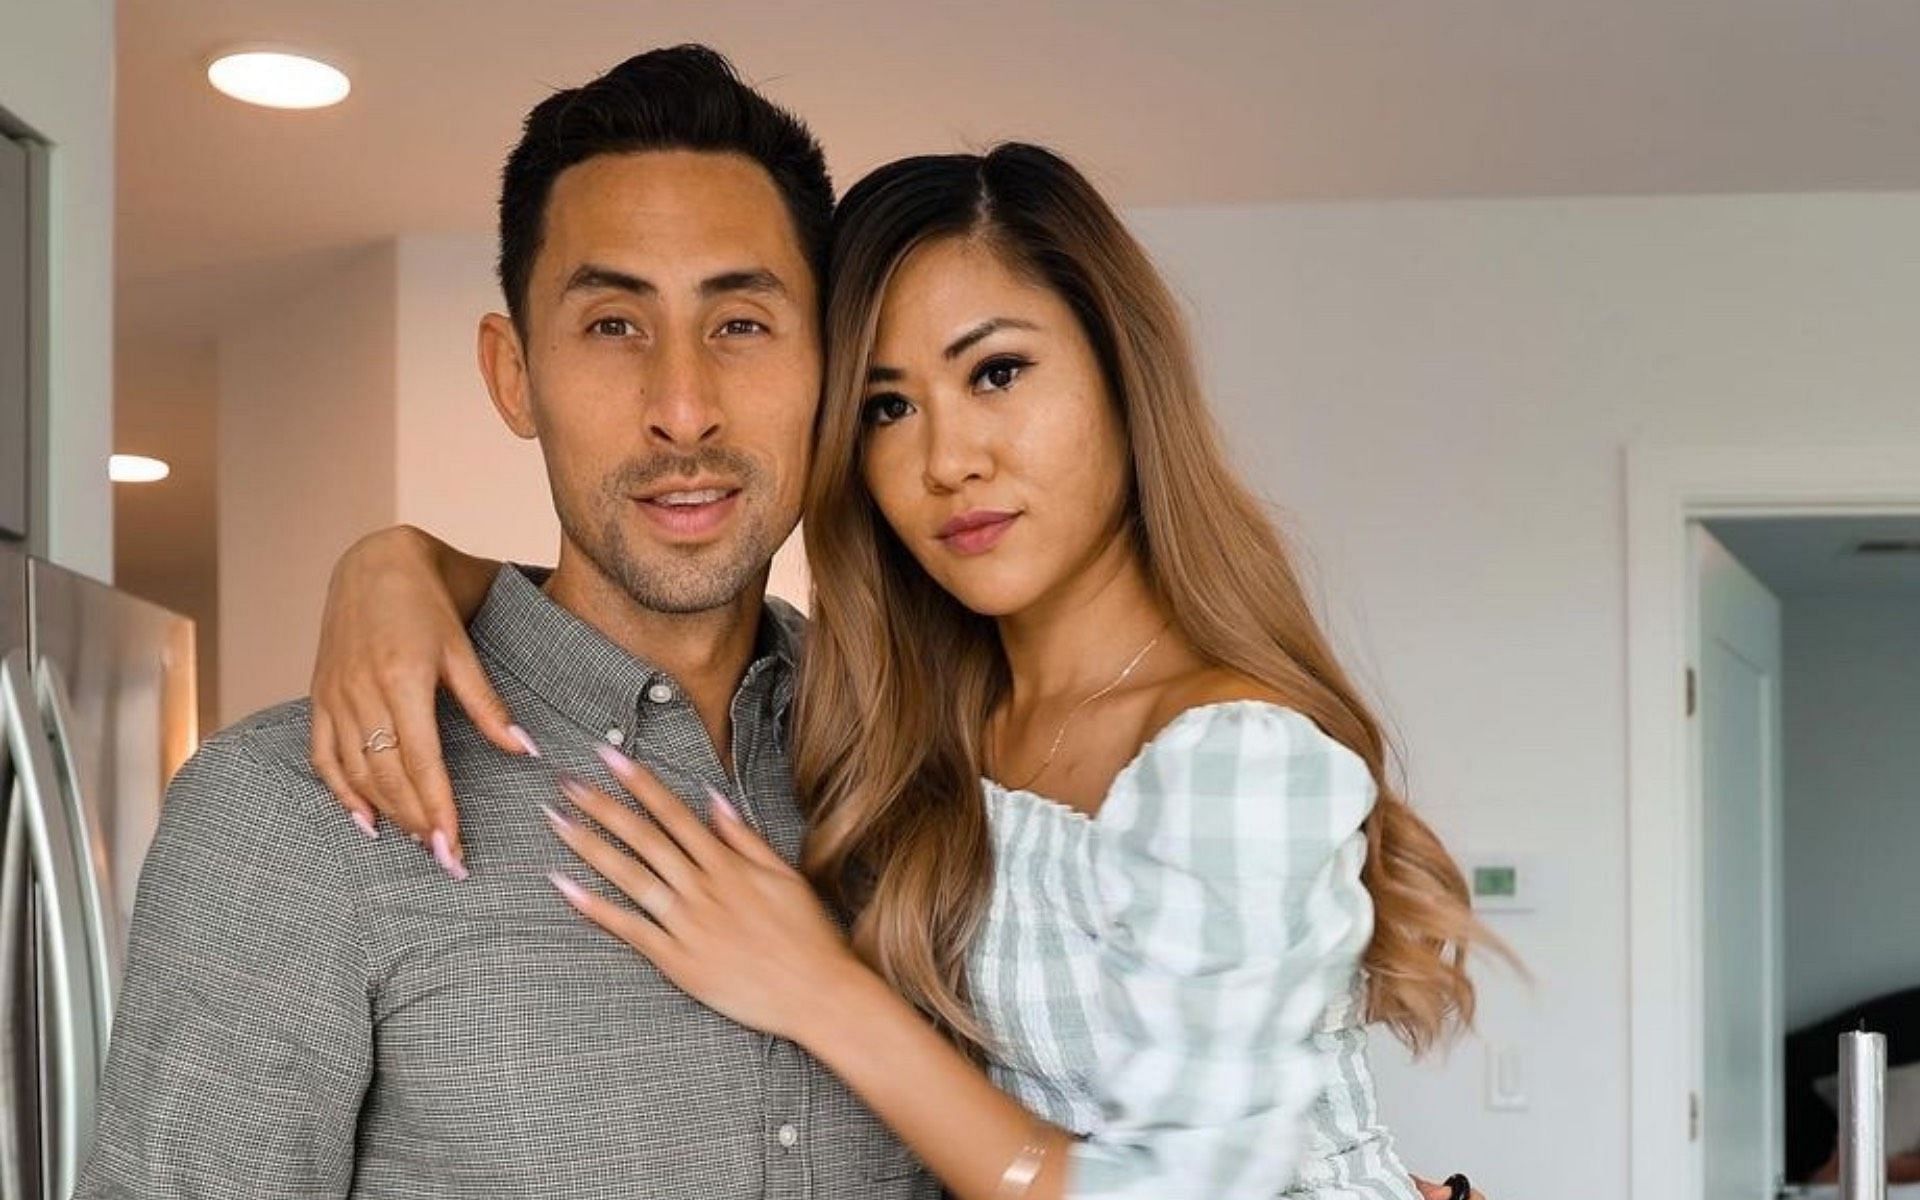 Married at First Sight couple Steve Moy and Noi Phommasak (Image via @therealstevemoy/Instagram)